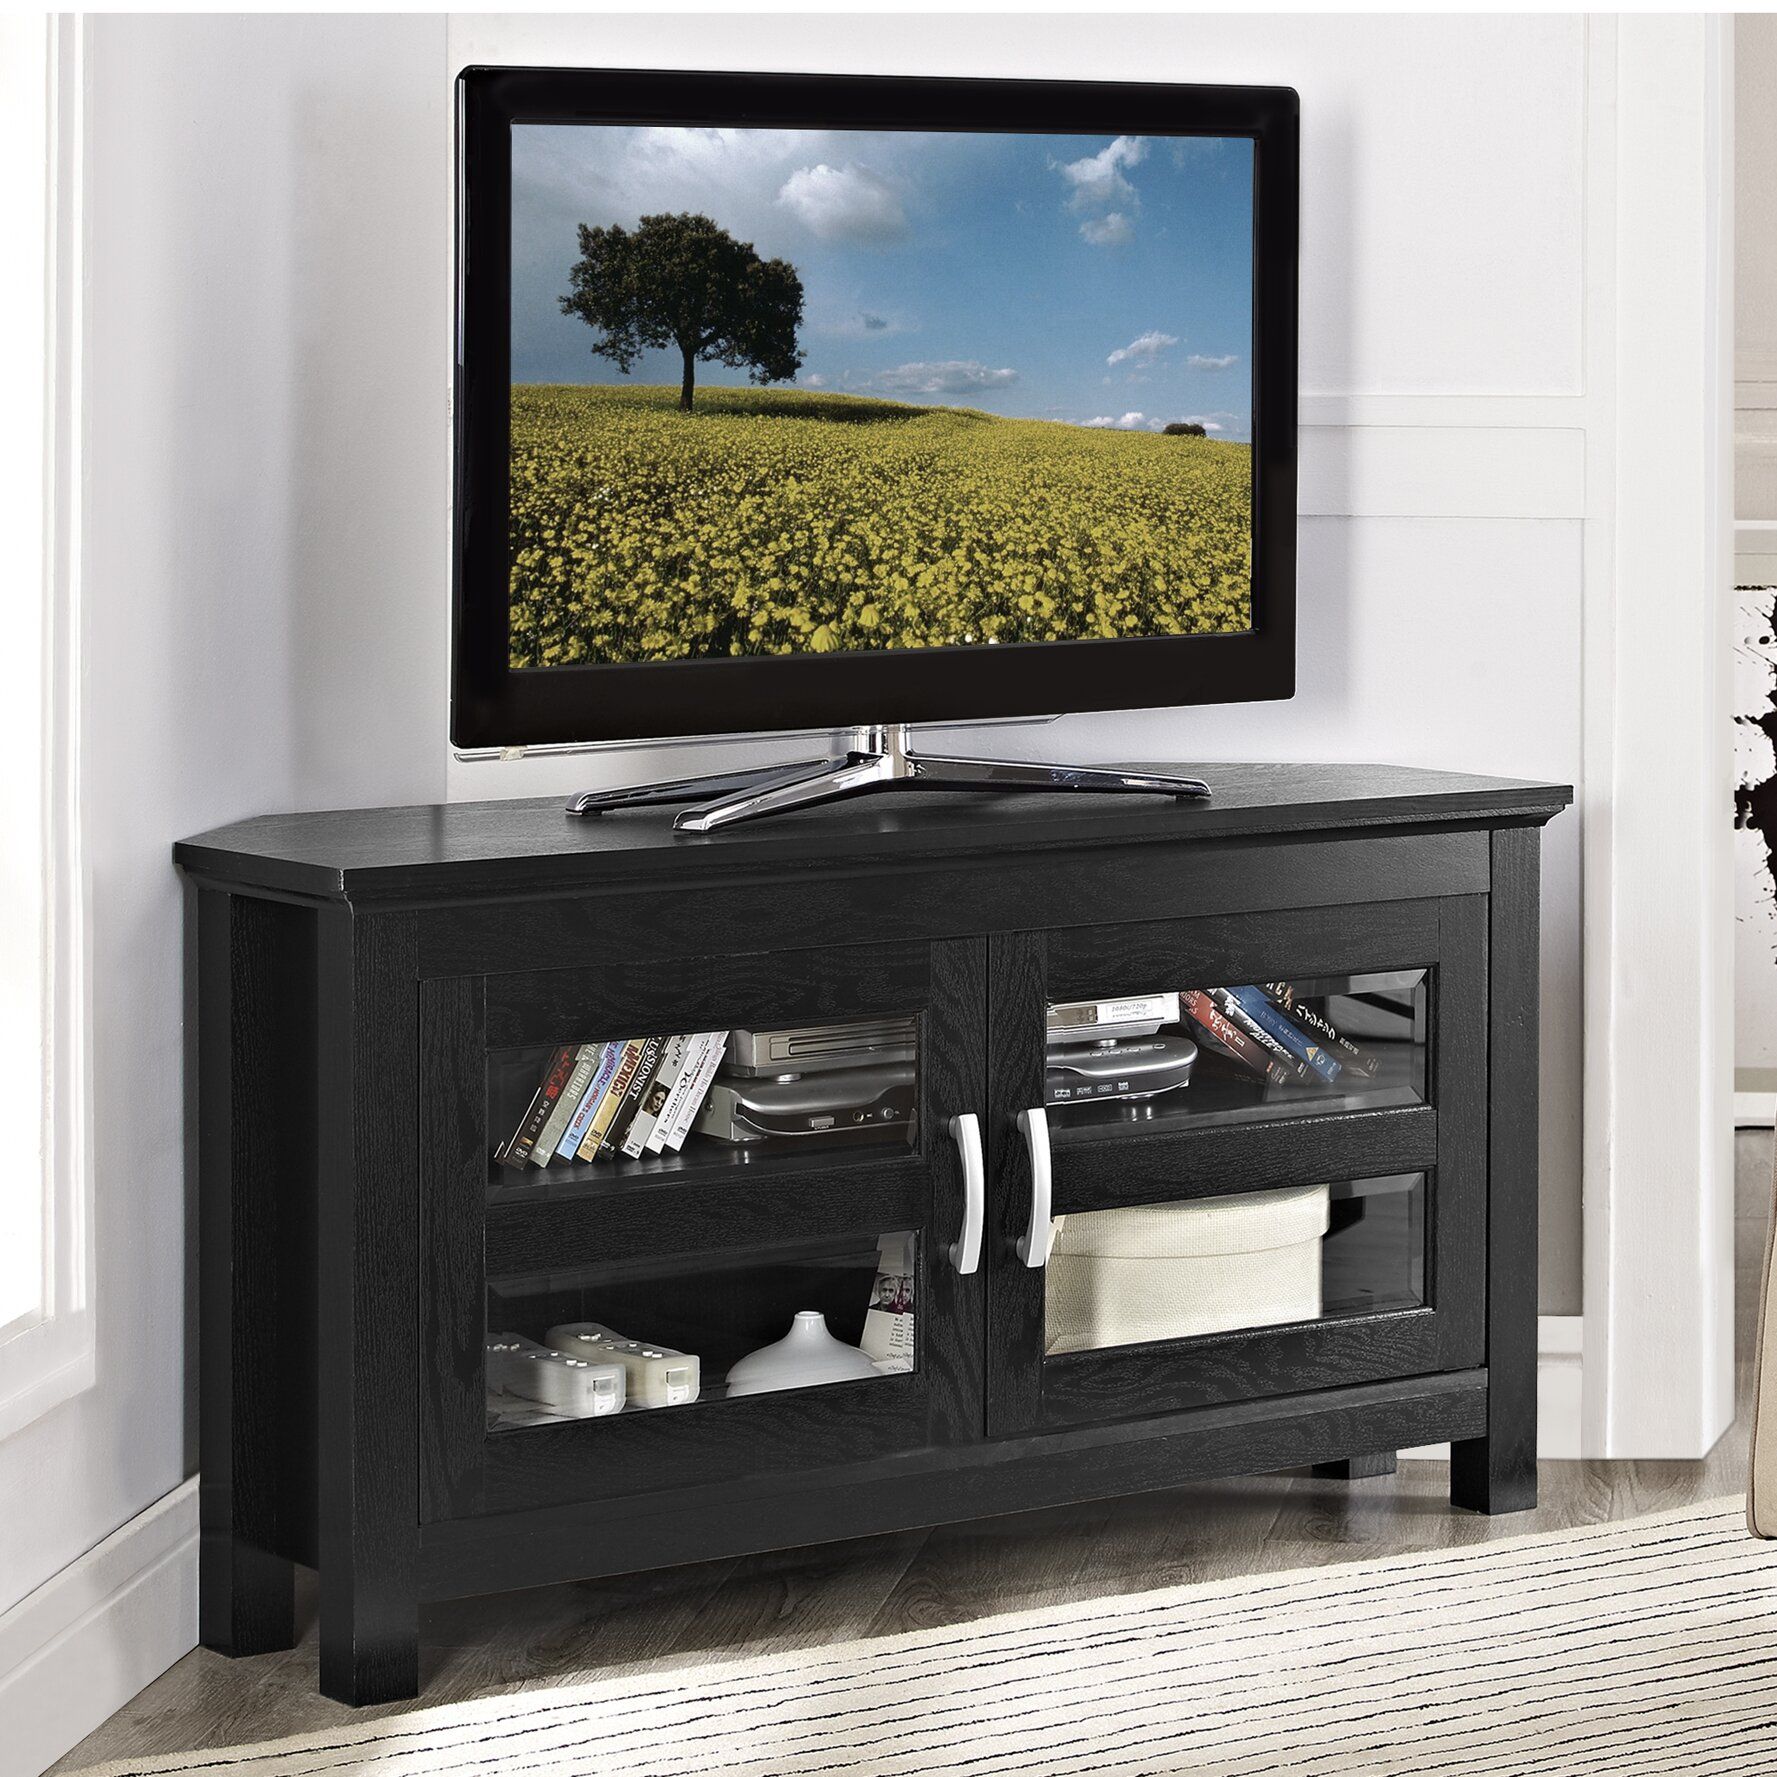 Alcott Hill Sulyard Wood Corner Tv Stand & Reviews | Wayfair Within Wooden Tv Stands (View 4 of 15)